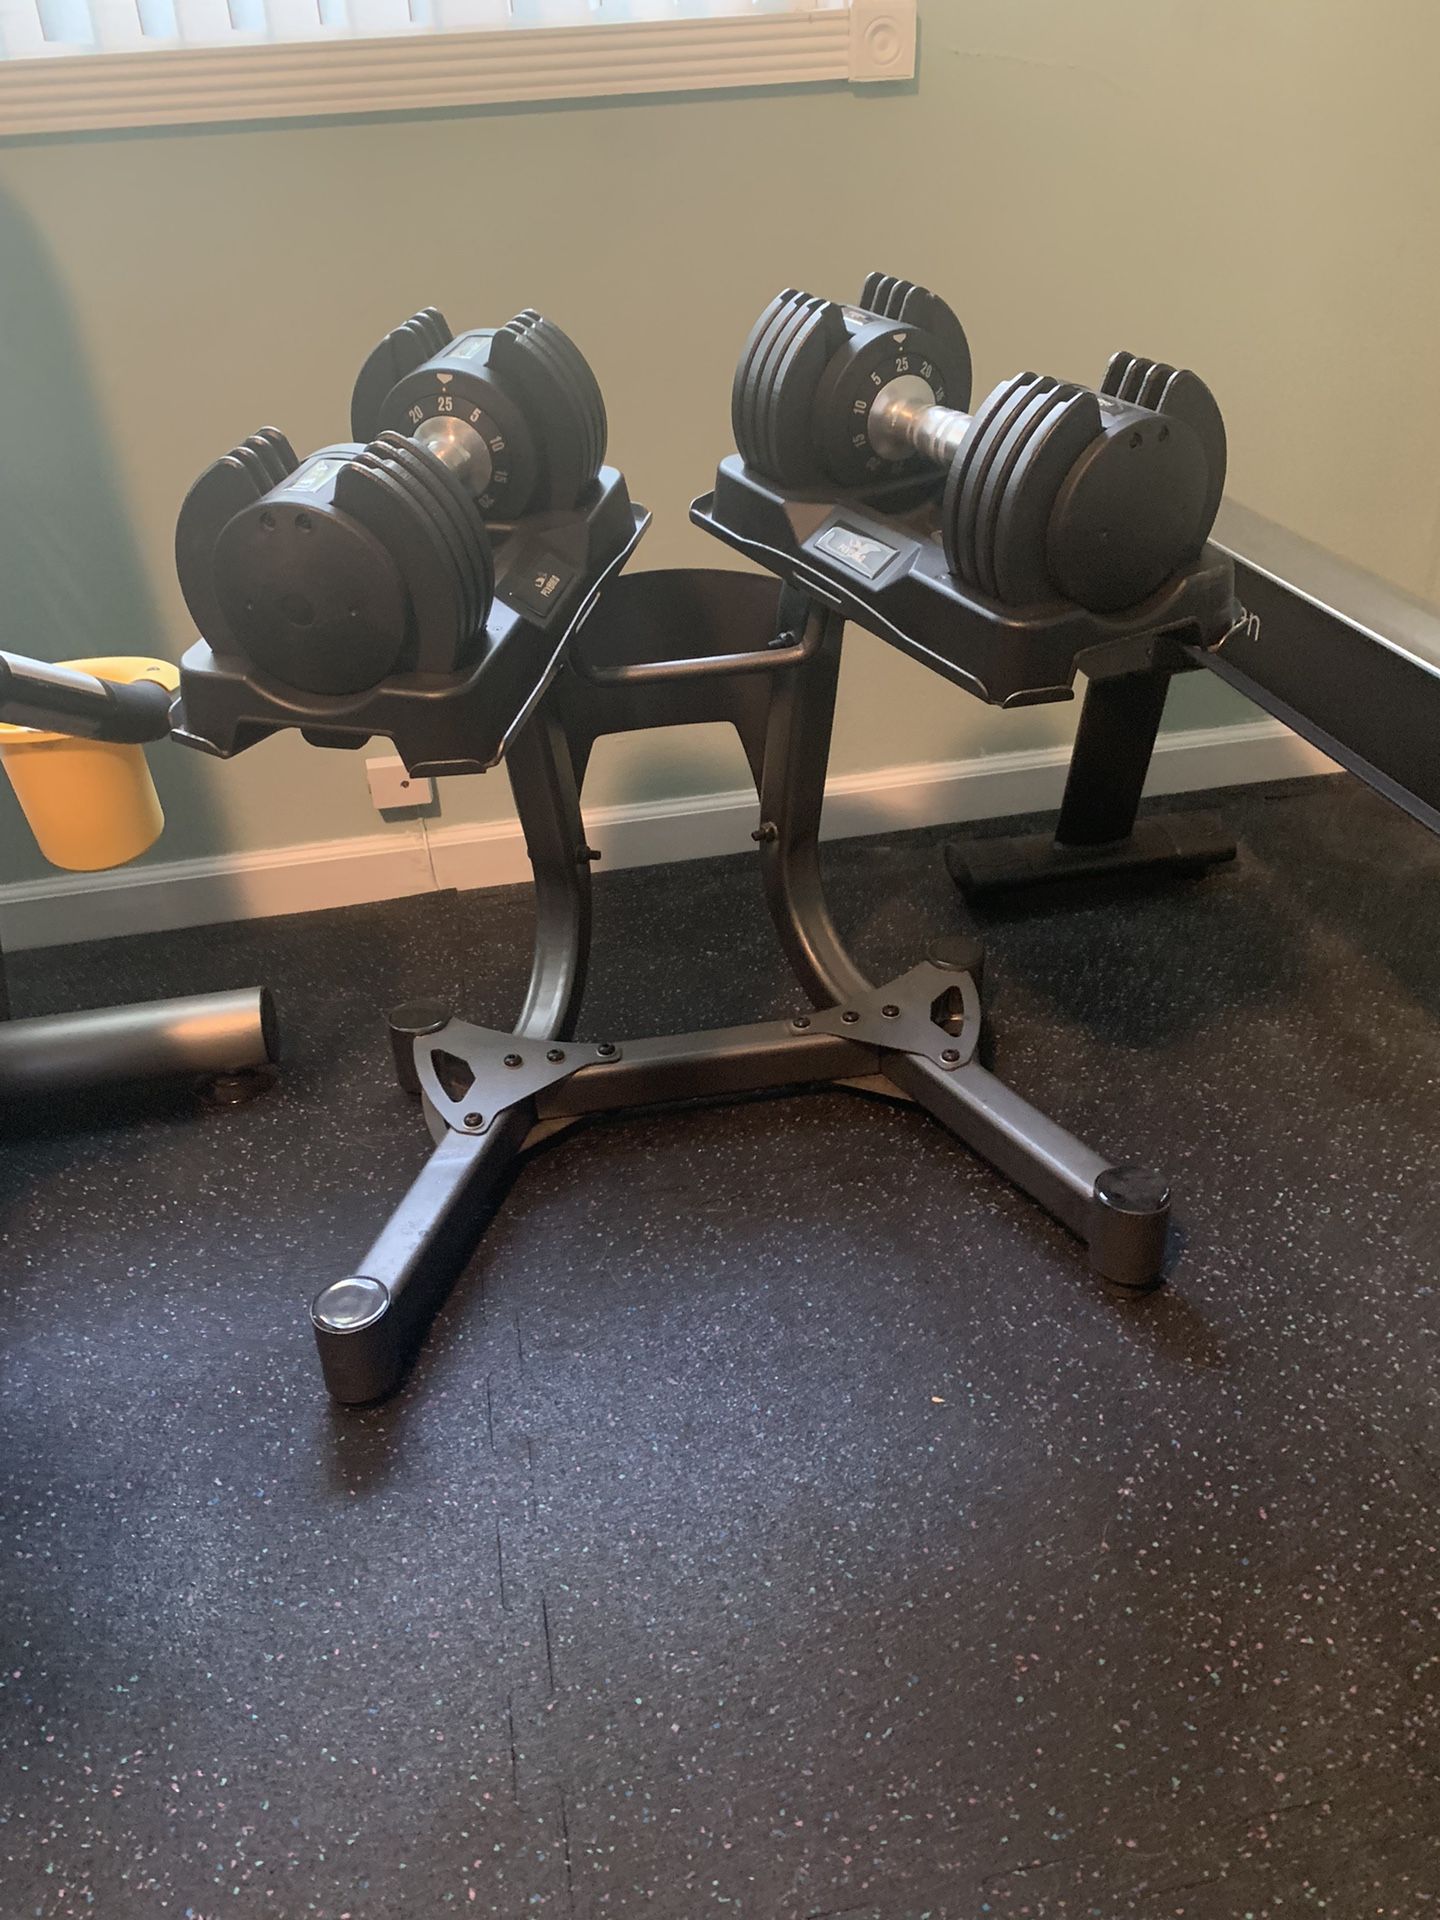 Dumbbell Set With Stand.